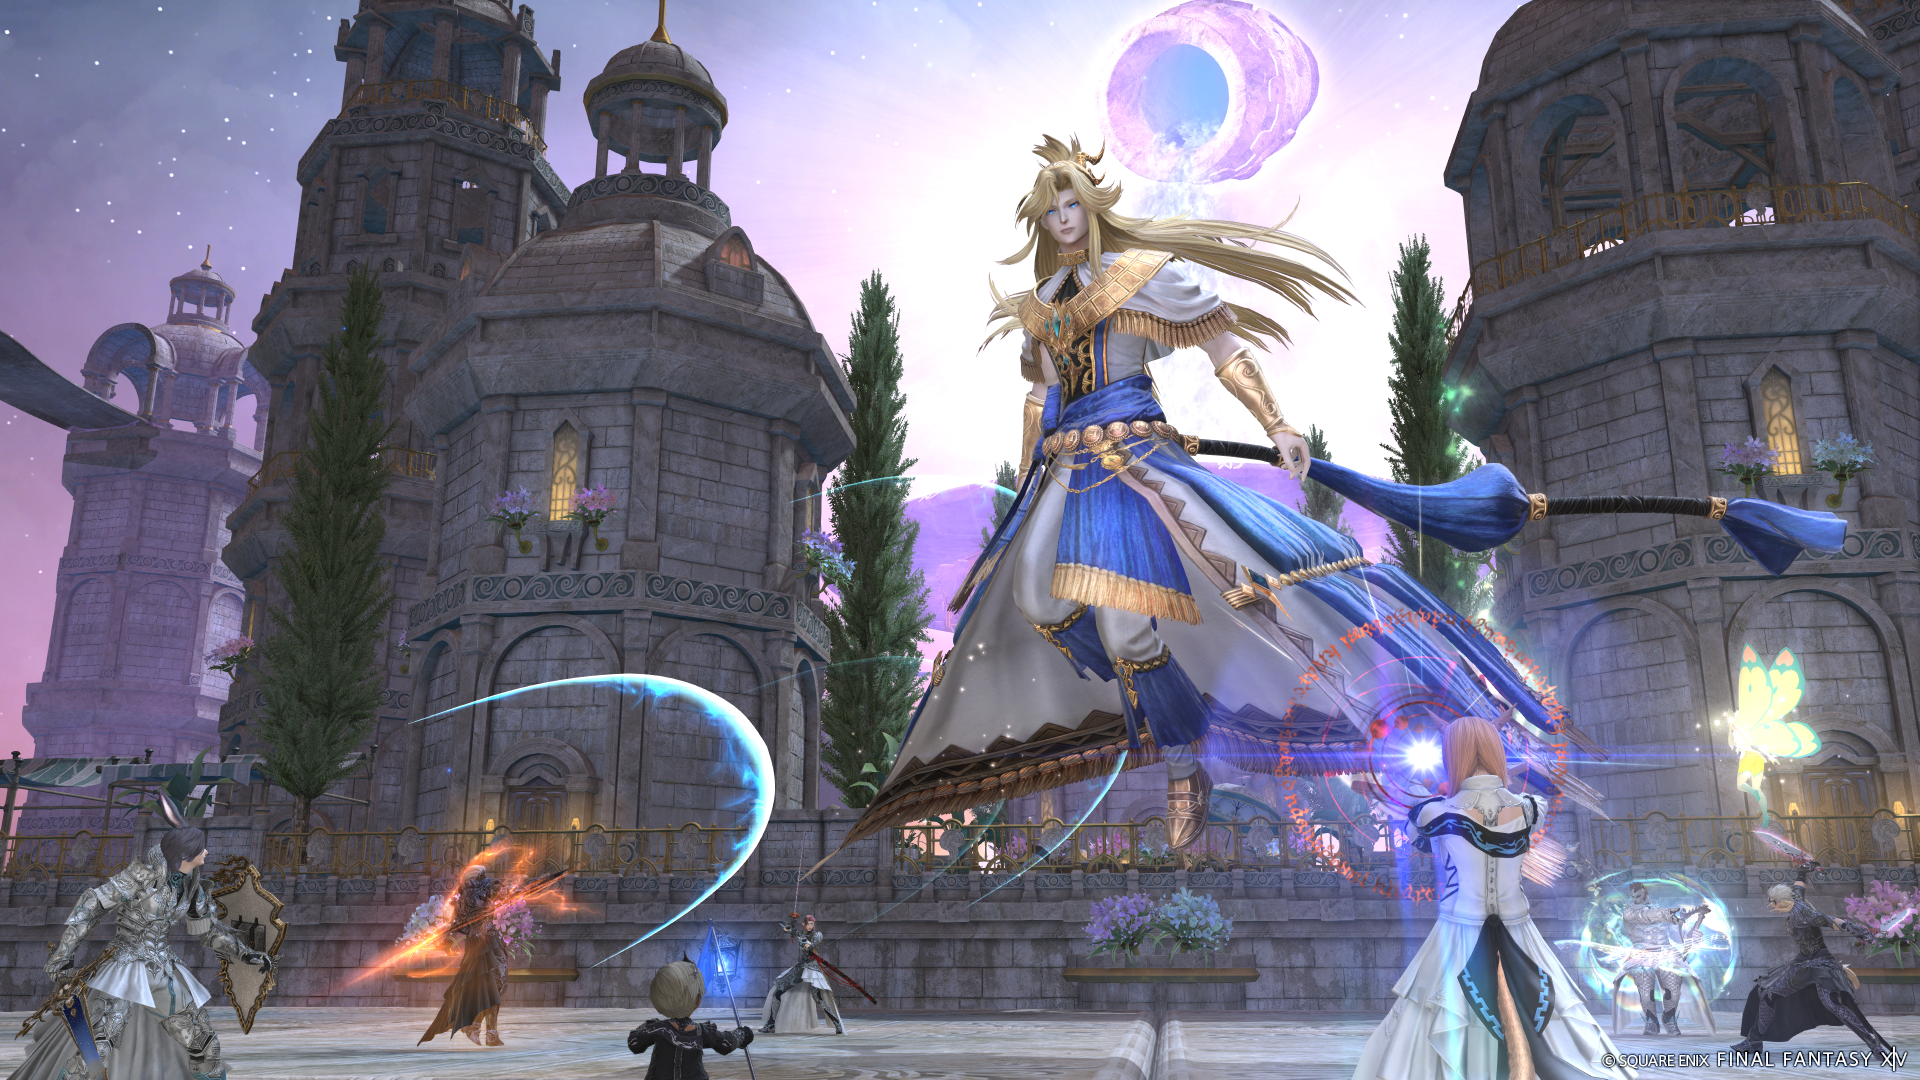 Players tackle a beautiful, floating sorceress in a battle scene from Final Fantasy 14